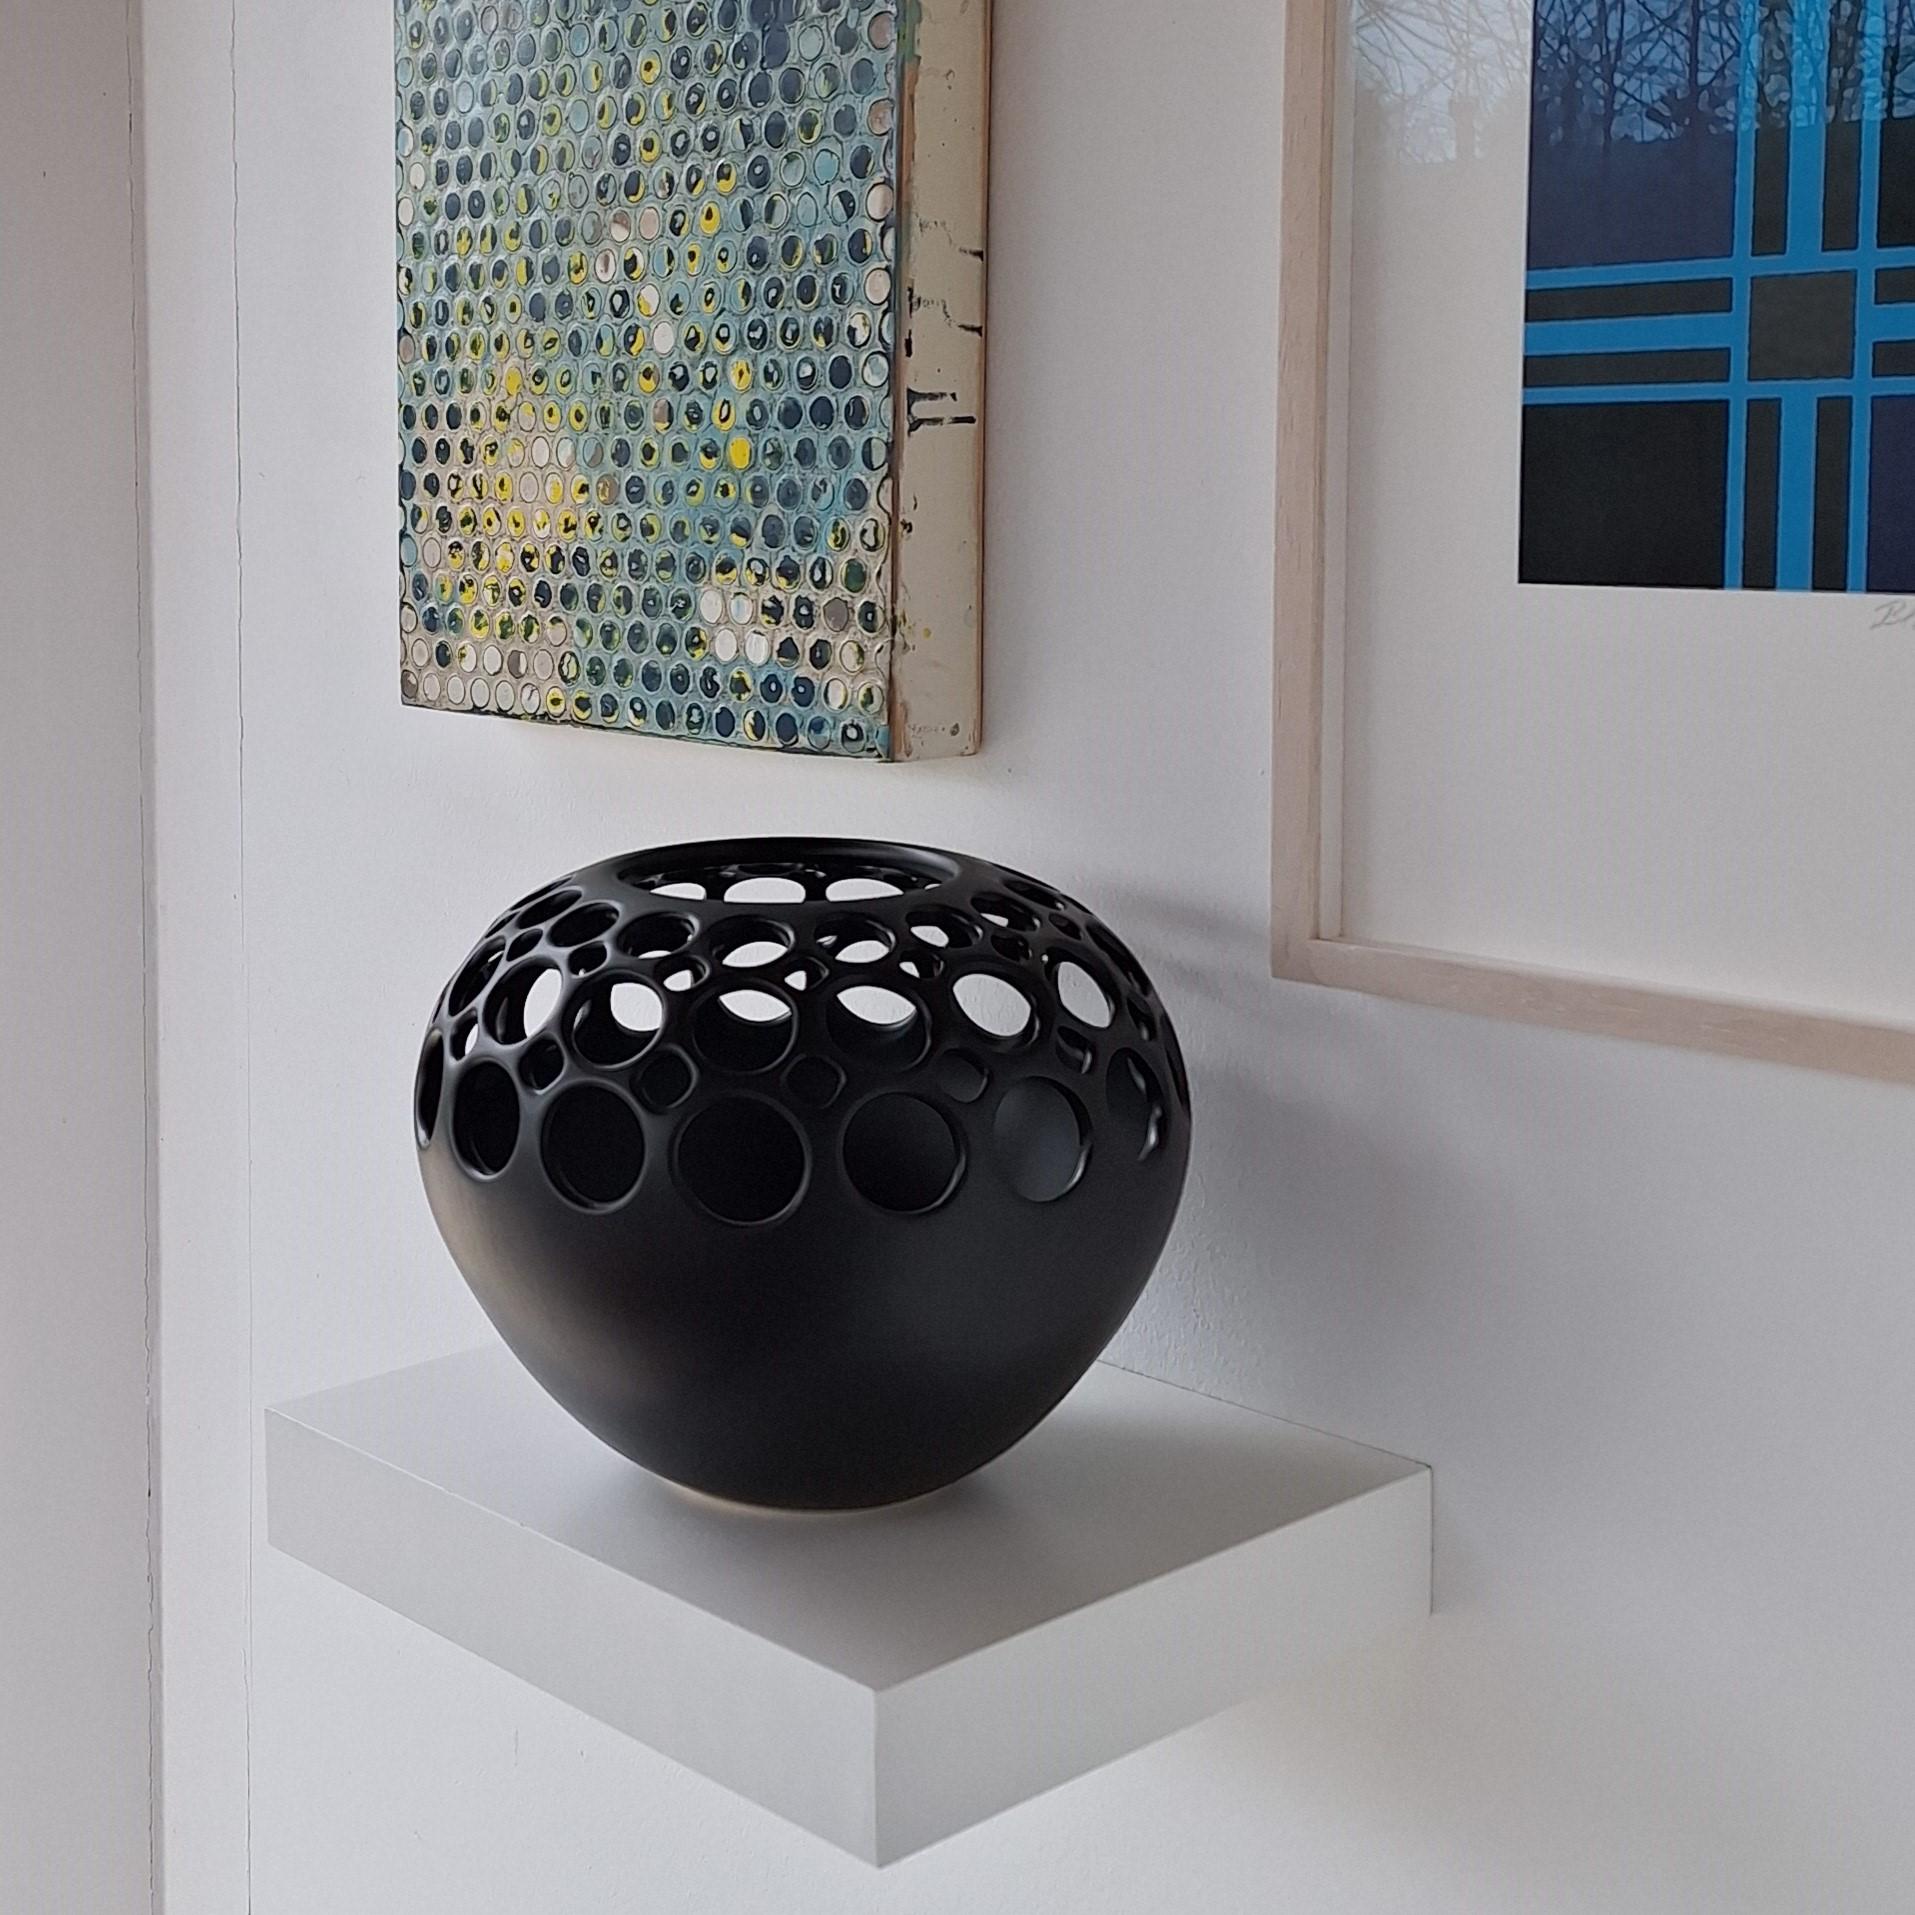 Orb Demi Round Lace Black - contemporary modern ceramic vessel object - Contemporary Art by Lynne Meade